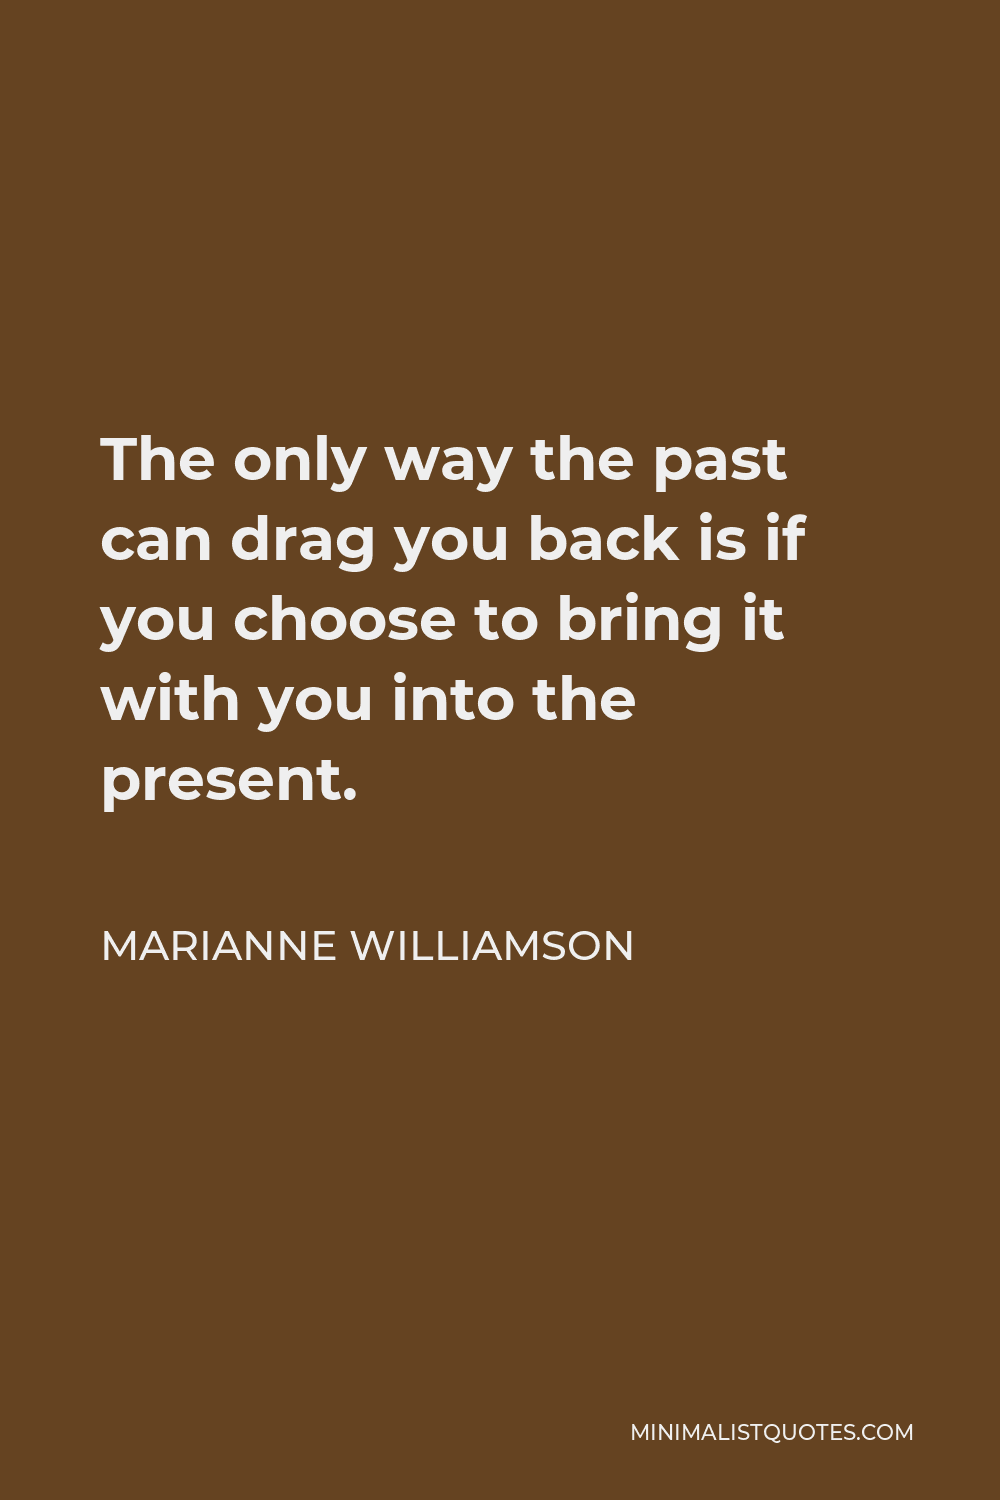 Marianne Williamson Quote - The only way the past can drag you back is if you choose to bring it with you into the present.